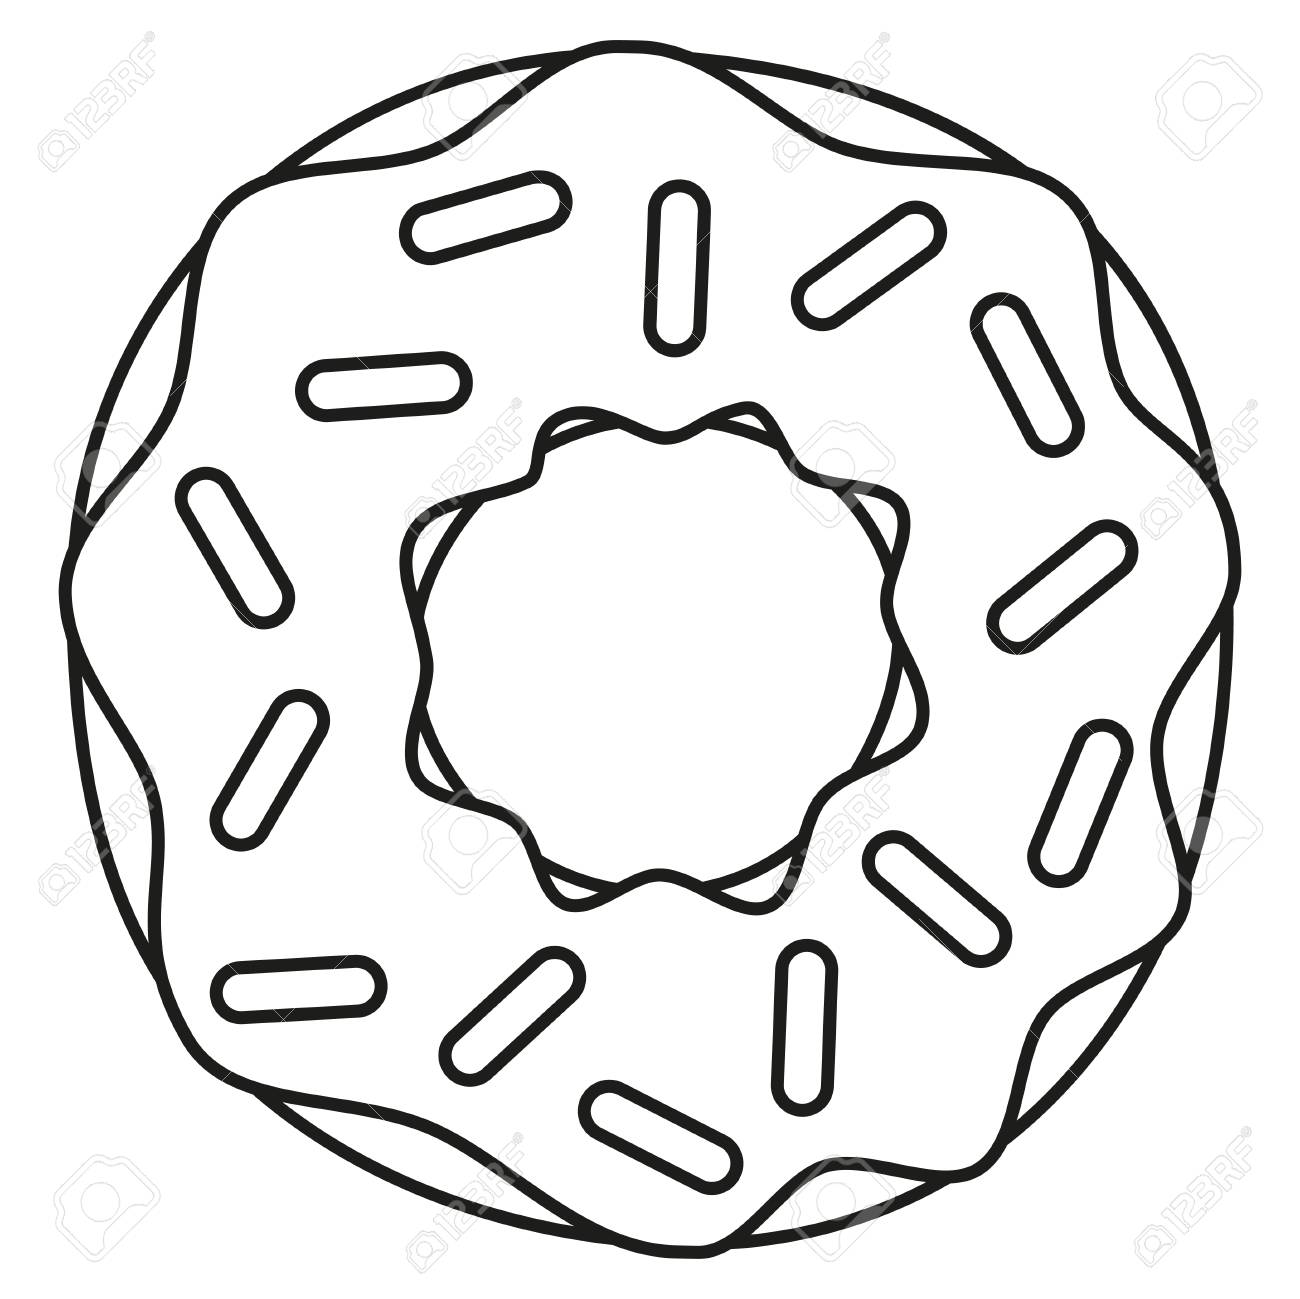 Coloring Pages  Donut Coloring Page Pages Line Art Black ...